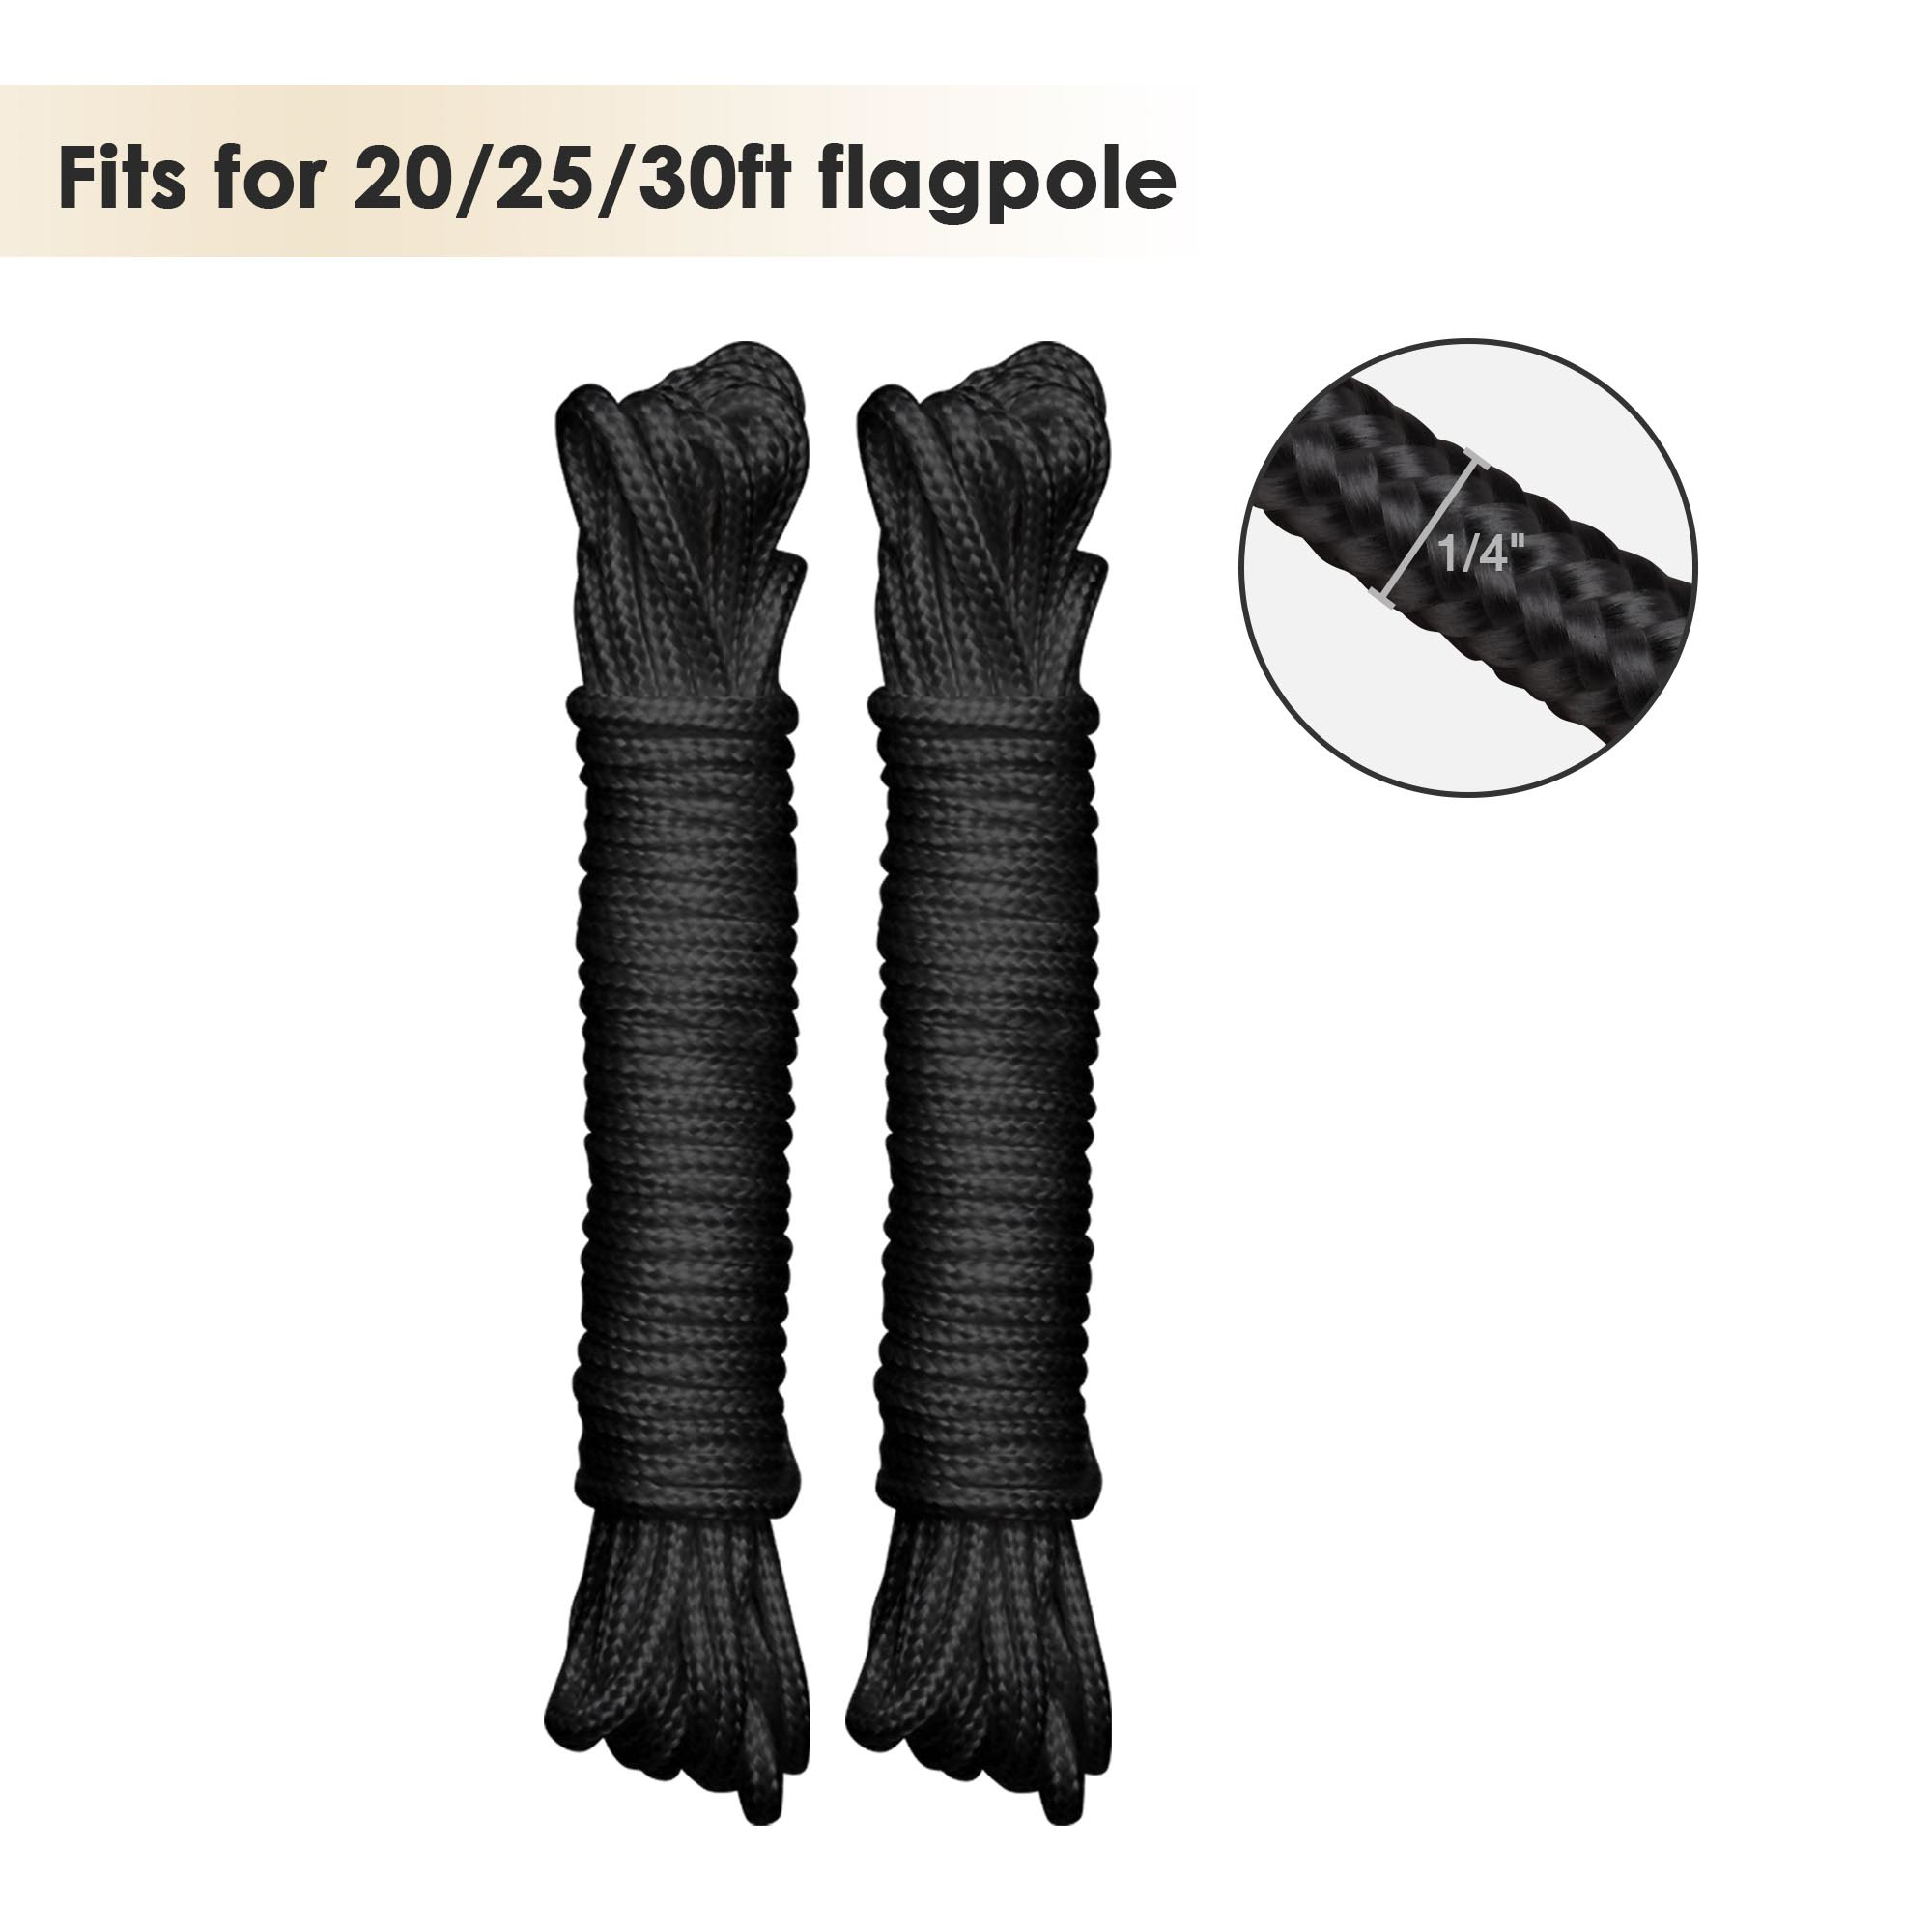 YesHom Flag Pole Parts Repair Kit Black Eagle Cleat Clip Truck Pulley Rope 20 25 30 Ft for 2" Diameter Flag Pole